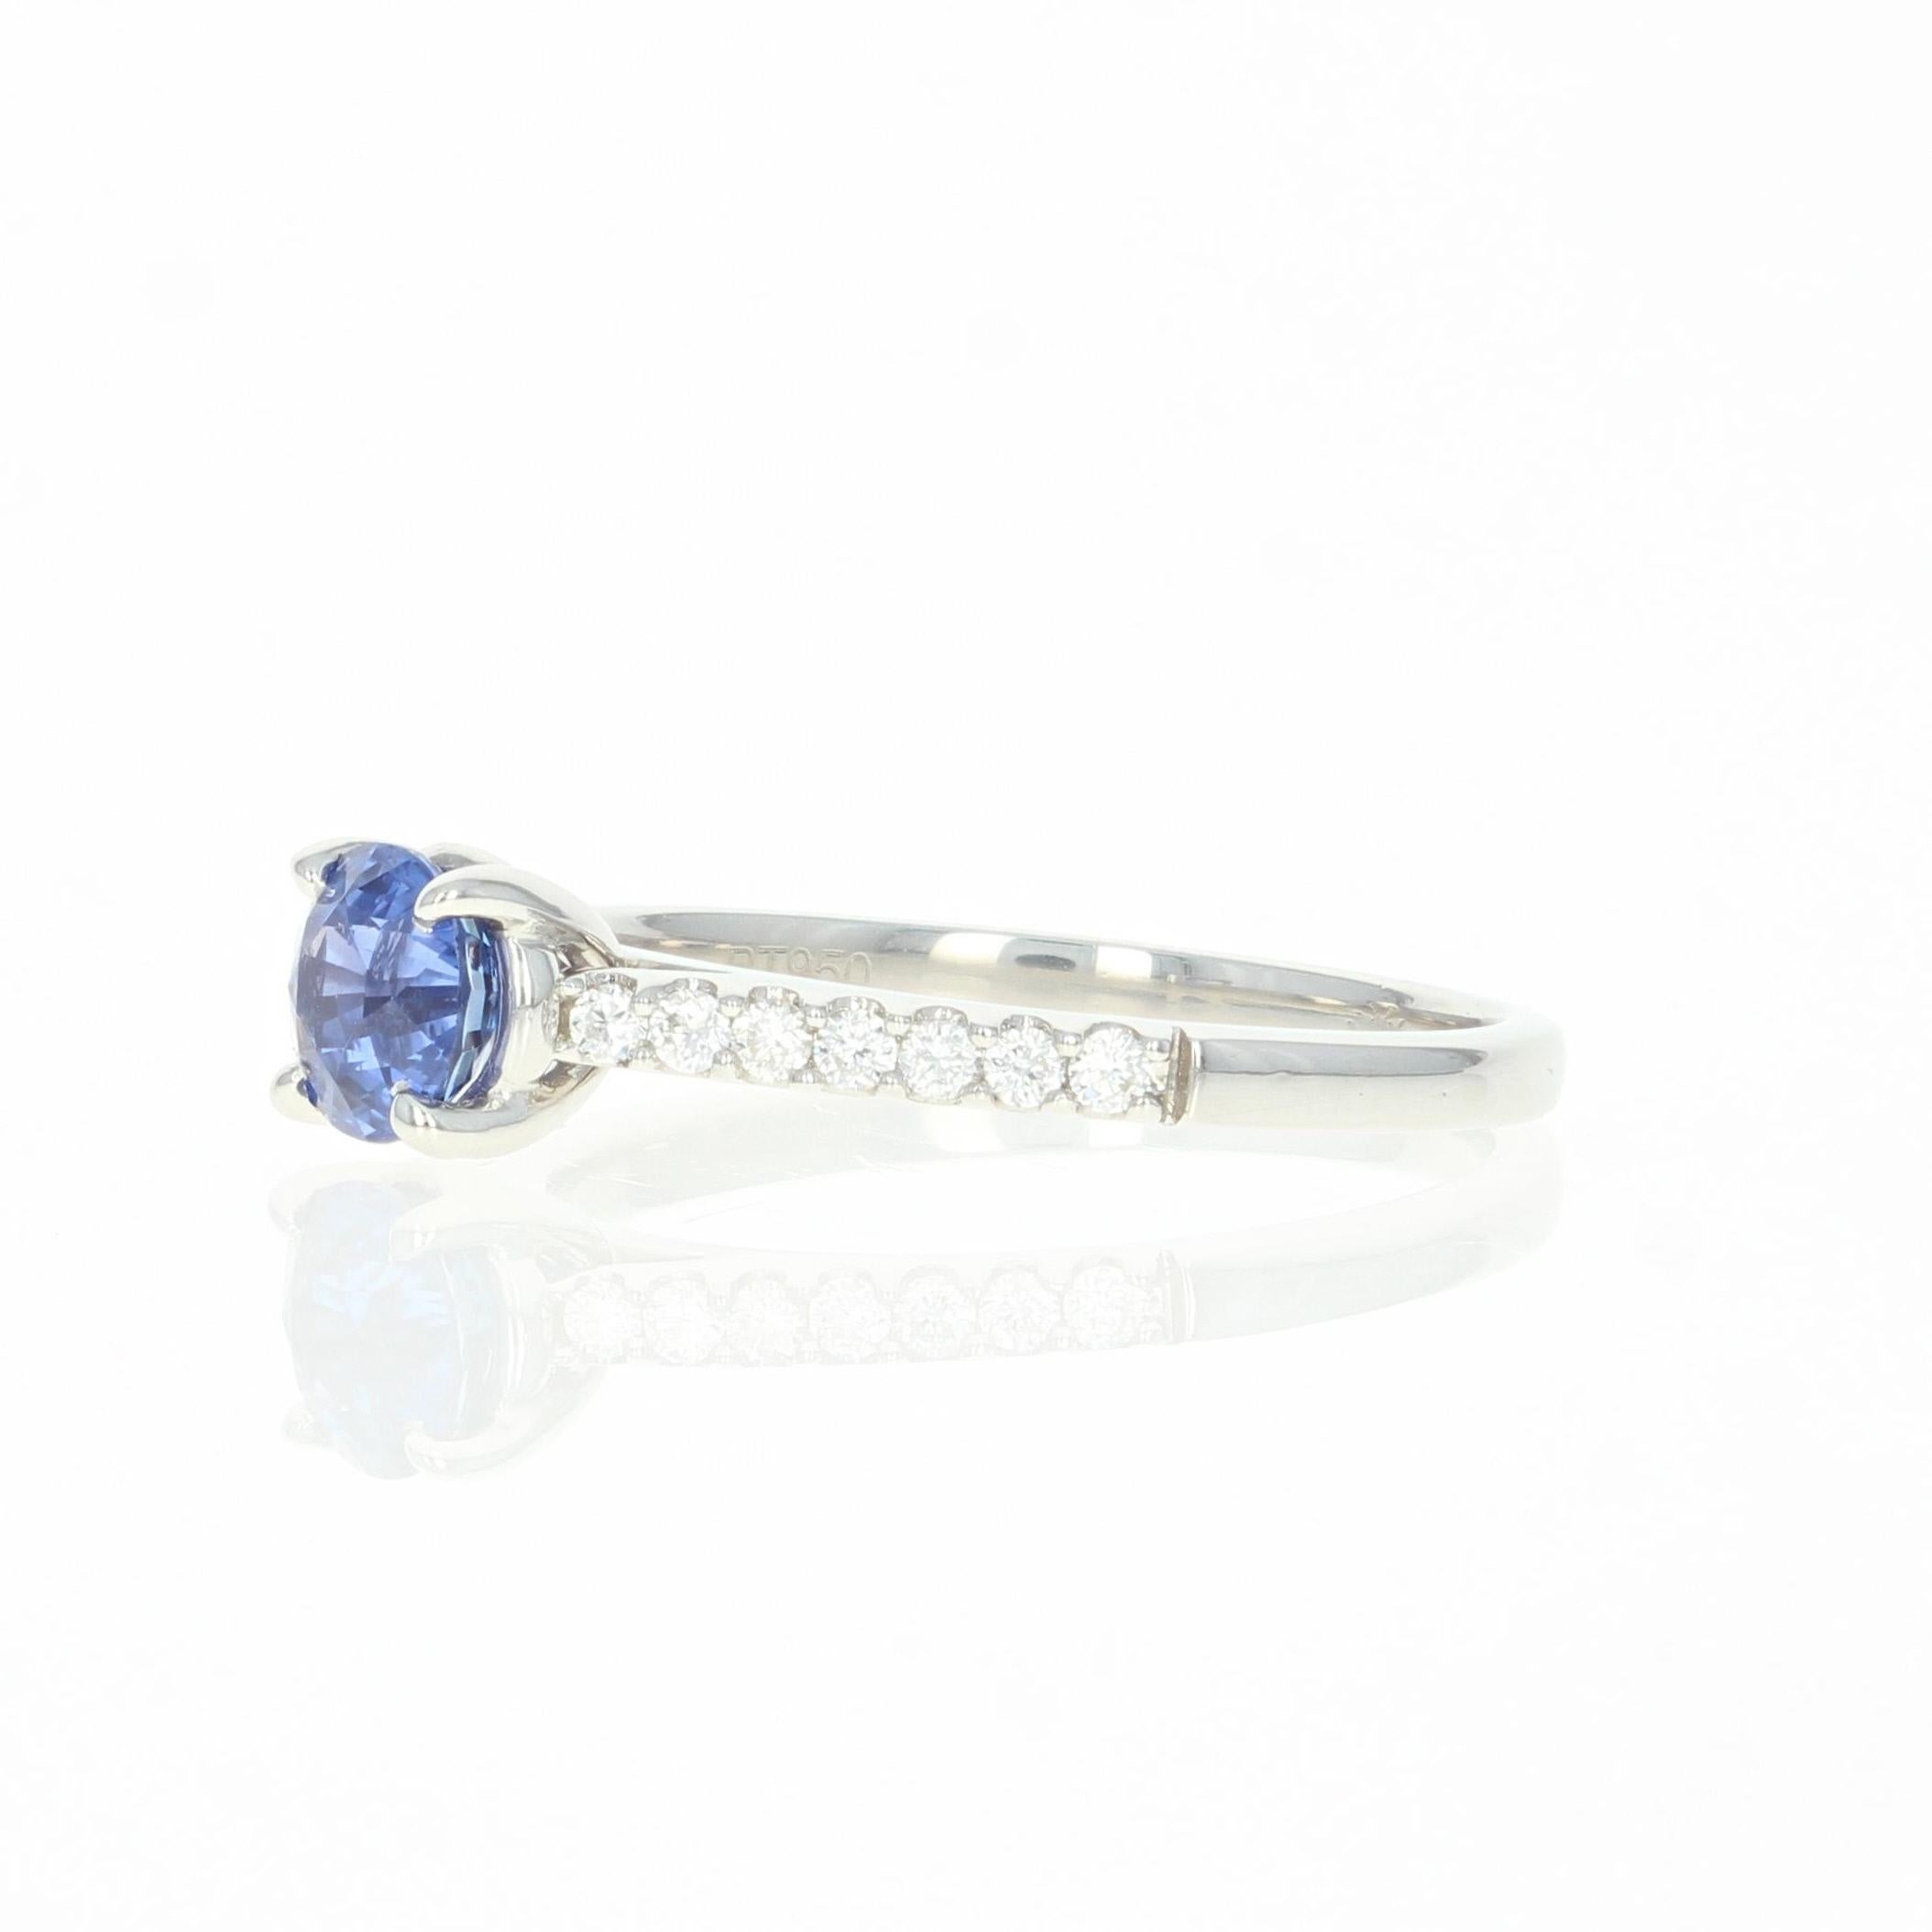 Captivatingly beautiful, this unique engagement piece will be a wonderful choice for your bride-to-be! This ring is crafted in heirloom-quality 950 platinum and showcases a vivacious sapphire solitaire sweetly accompanied by glittering white